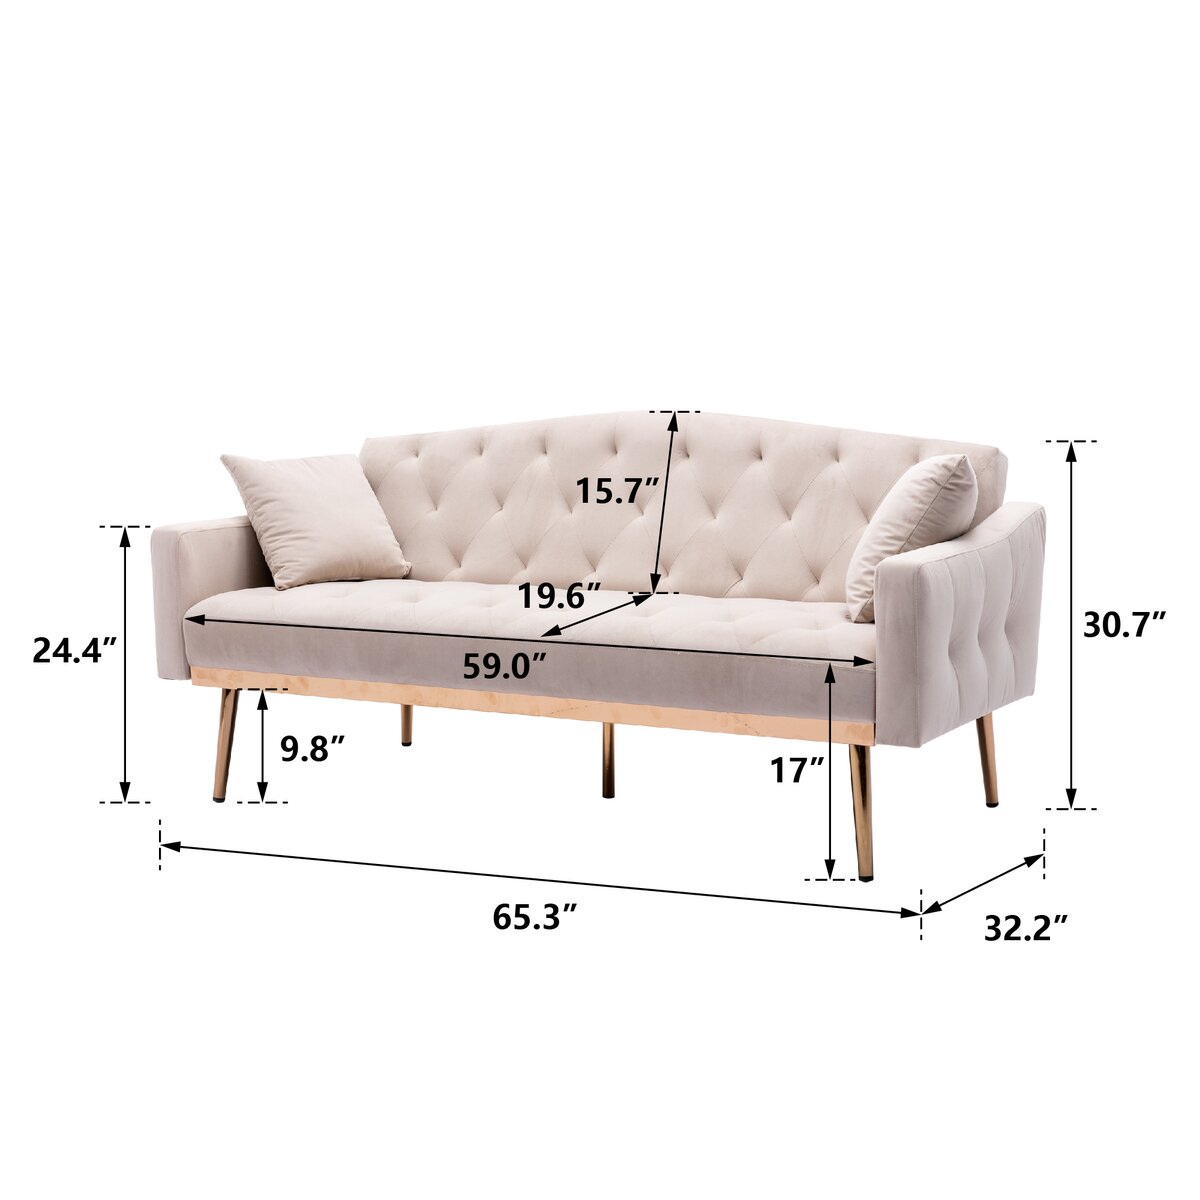 Everly Quinn VelvetSofa , Accent Sofa .Loveseat Sofa With Stainless ...